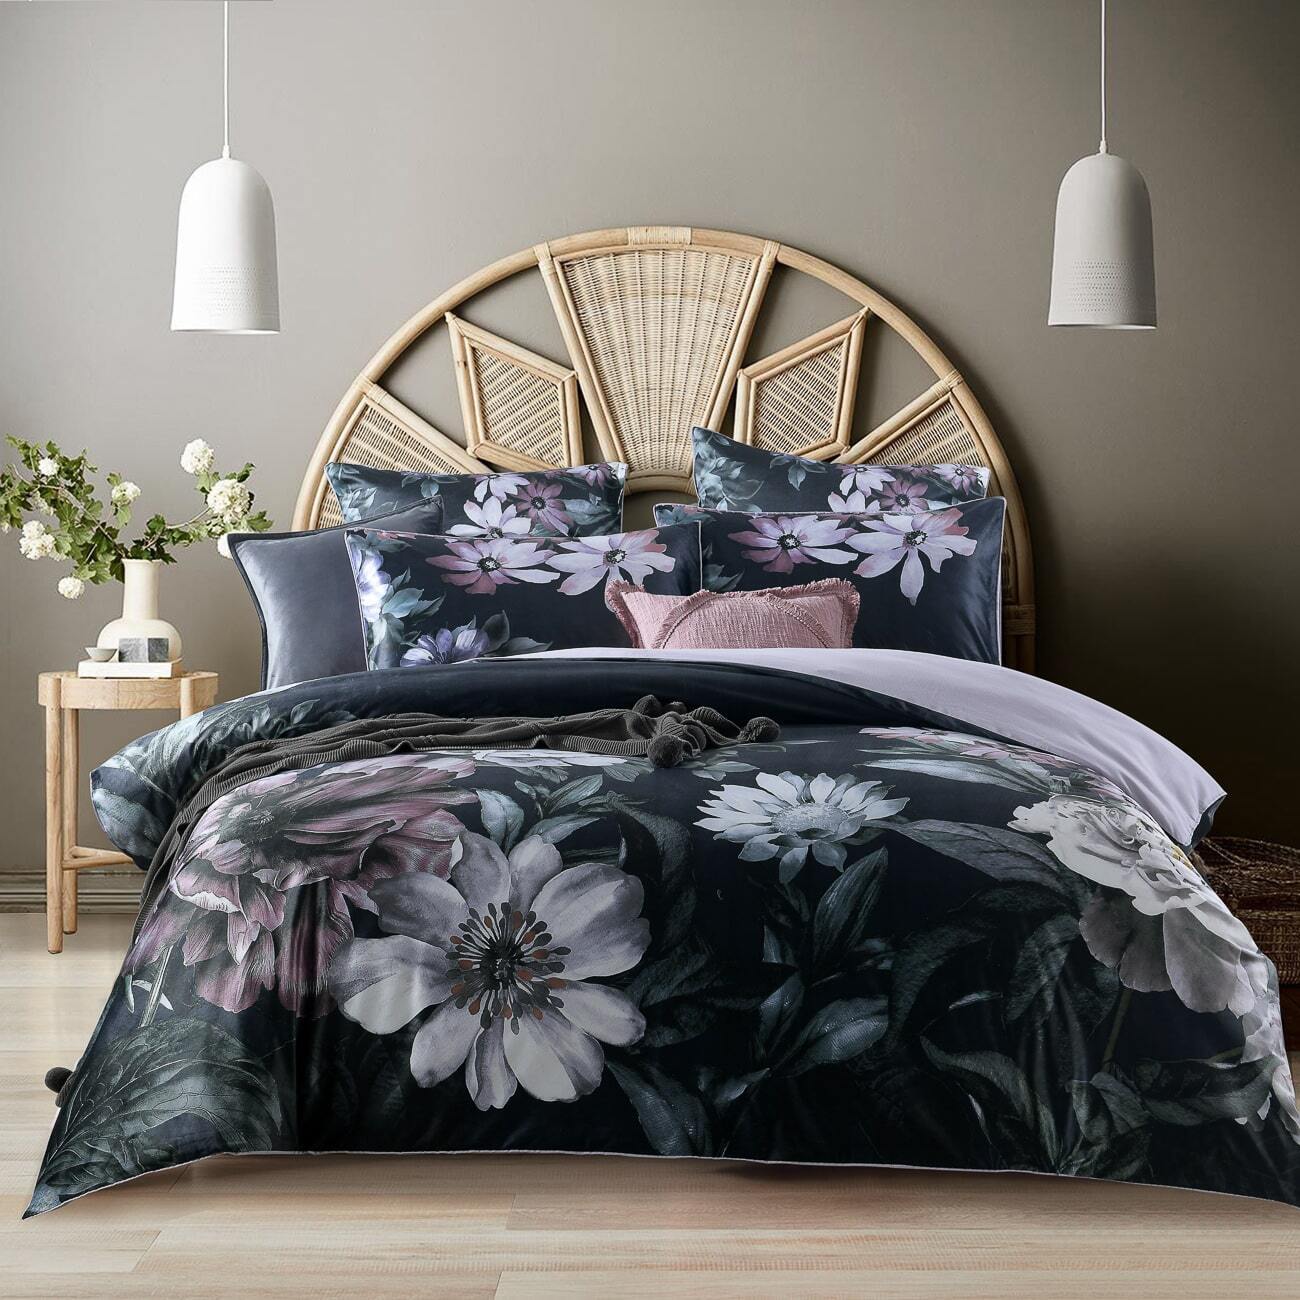 Quilt Covers Australia Online - Why Pay More?